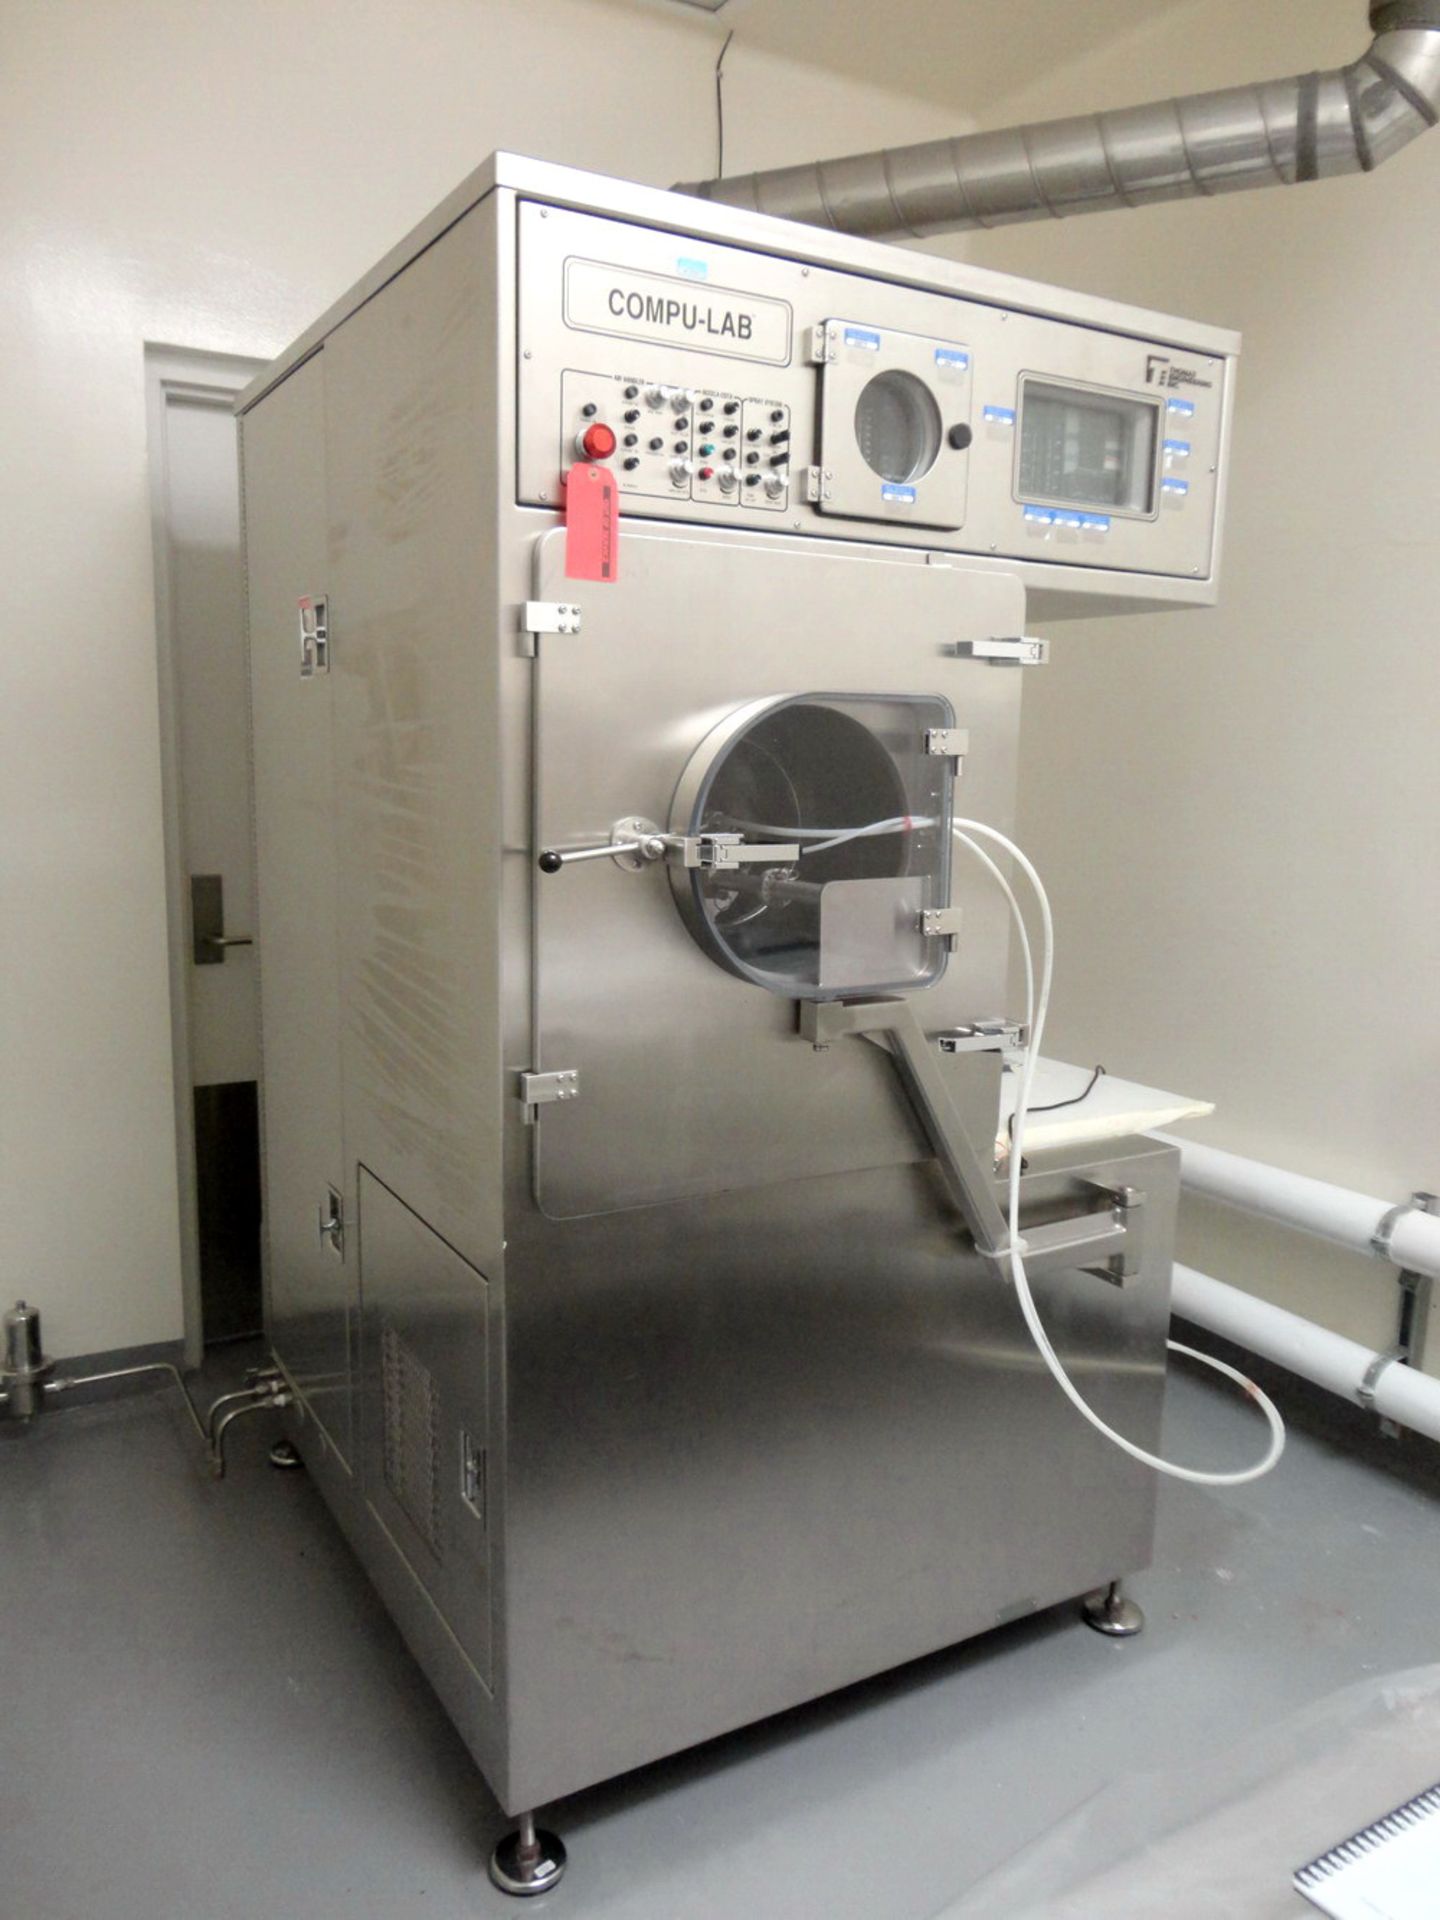 Thomas XR Self-Contained Tablet Coating System rated for solvents, Model Compulab 24, with 24" pan